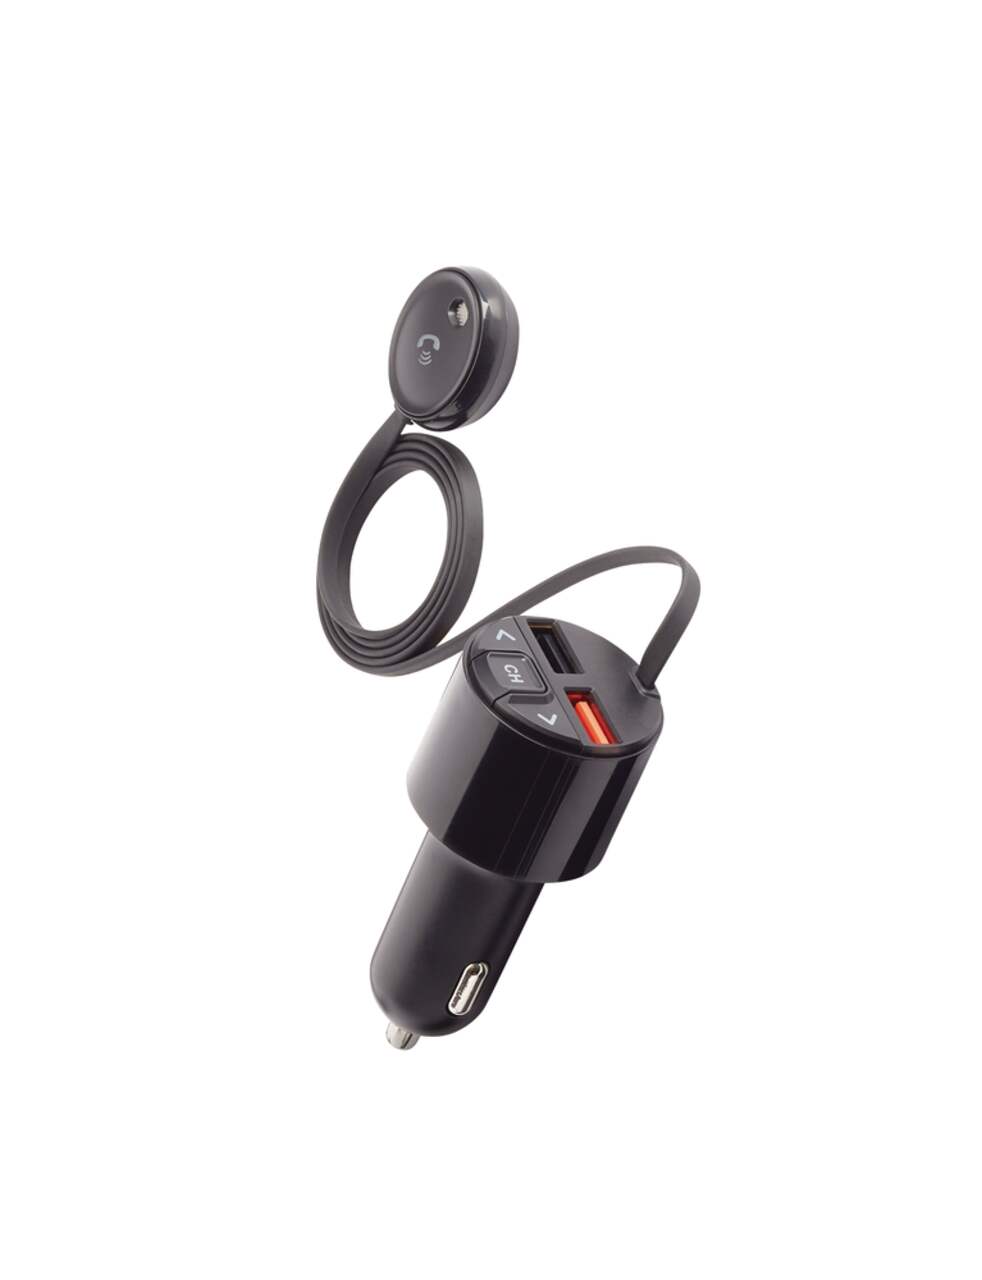 https://media-www.canadiantire.ca/product/automotive/car-care-accessories/auto-electronics/0358070/bluehive-bluetooth-fm-transmitter-with-pro-mic-ac5d45cc-5f45-4d5a-aecf-f3e11a0eb760.png?imdensity=1&imwidth=1244&impolicy=mZoom